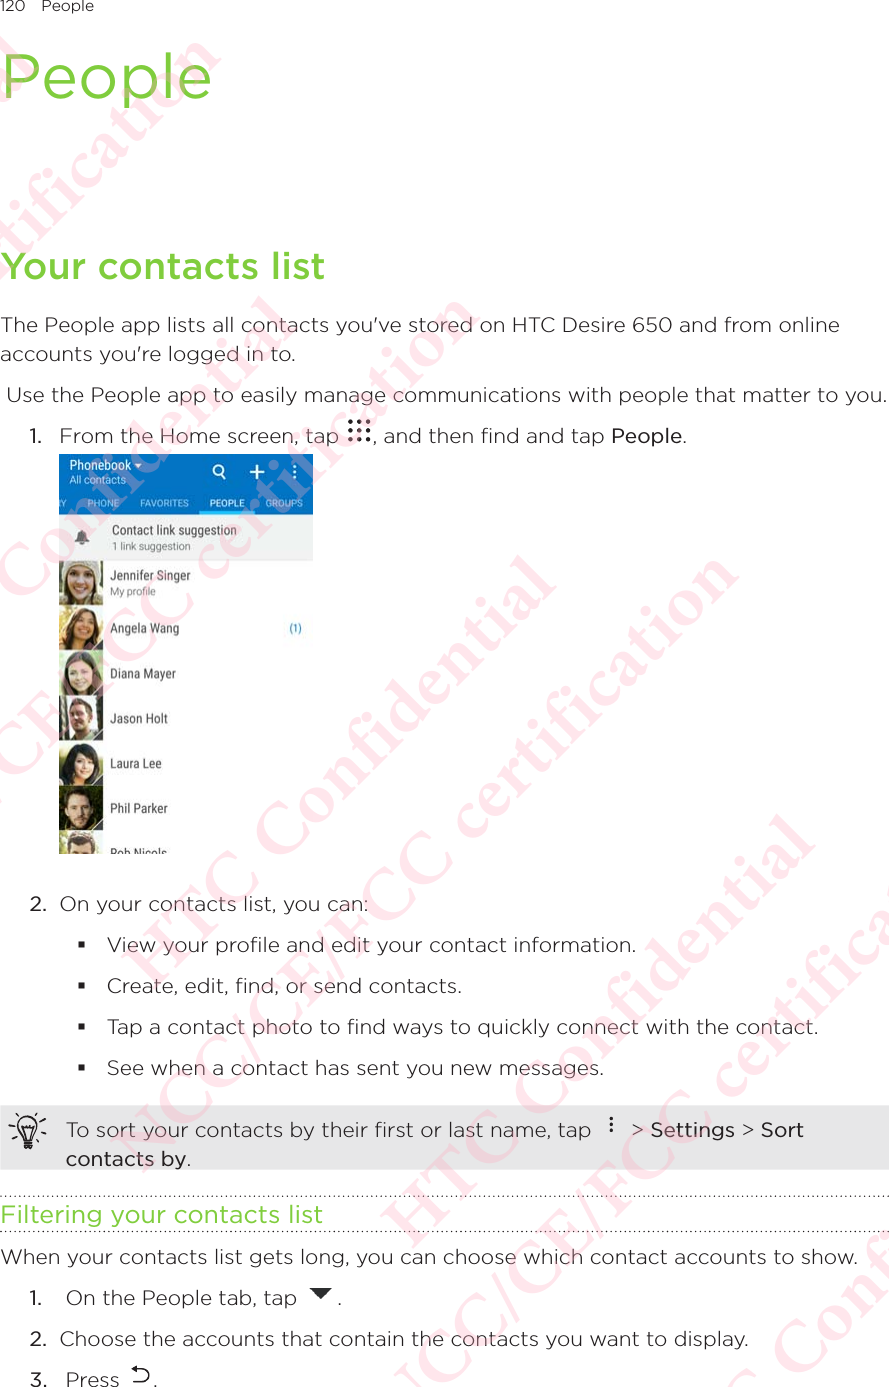 120 PeoplePeopleYour contacts listThe People app lists all contacts you&apos;ve stored on HTC Desire 650 and from online accounts you&apos;re logged in to.  Use the People app to easily manage communications with people that matter to you. 1.  From the Home screen, tap  , and then find and tap People.  2.  On your contacts list, you can:  View your profile and edit your contact information.  Create, edit, find, or send contacts.  Tap a contact photo to find ways to quickly connect with the contact.  See when a contact has sent you new messages. To sort your contacts by their first or last name, tap   &gt; Settings &gt; Sort contacts by. Filtering your contacts listWhen your contacts list gets long, you can choose which contact accounts to show. 1.   On the People tab, tap  . 2.  Choose the accounts that contain the contacts you want to display. 3.   Press  . HTC Confidential NCC/CE/FCC certification  HTC Confidential NCC/CE/FCC certification  HTC Confidential NCC/CE/FCC certification  HTC Confidential NCC/CE/FCC certification  HTC Confidential NCC/CE/FCC certification